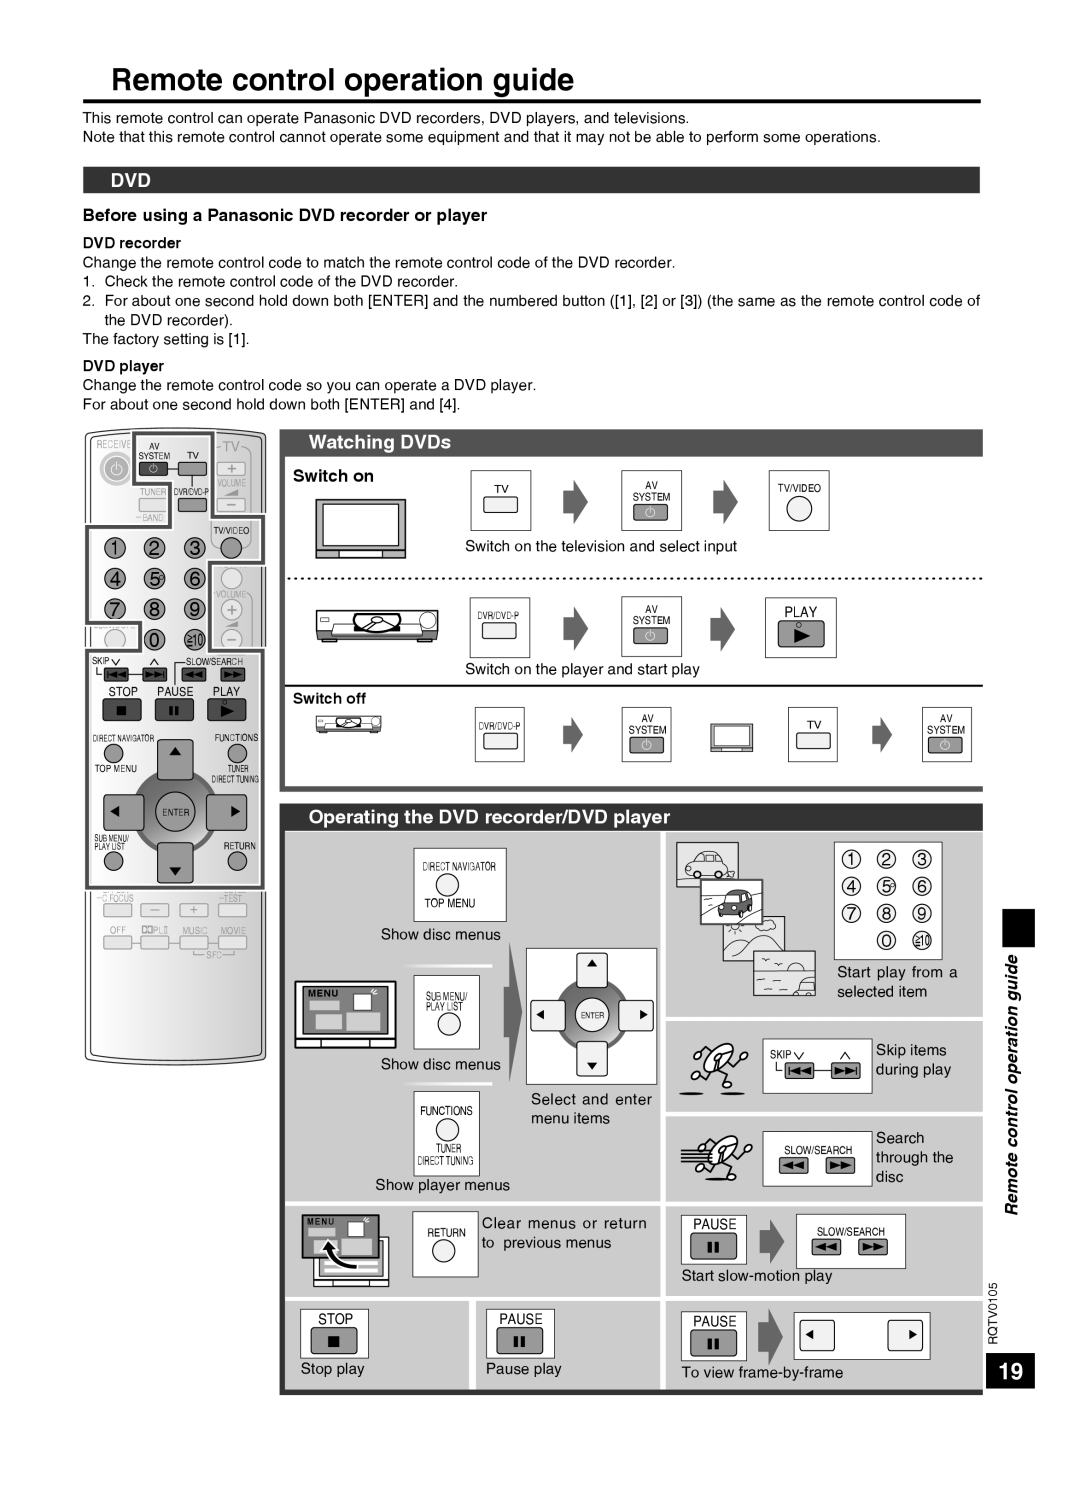 Panasonic SC-HT40 specifications Remote control operation guide, Watching DVDs, Operating the DVD recorder/DVD player 